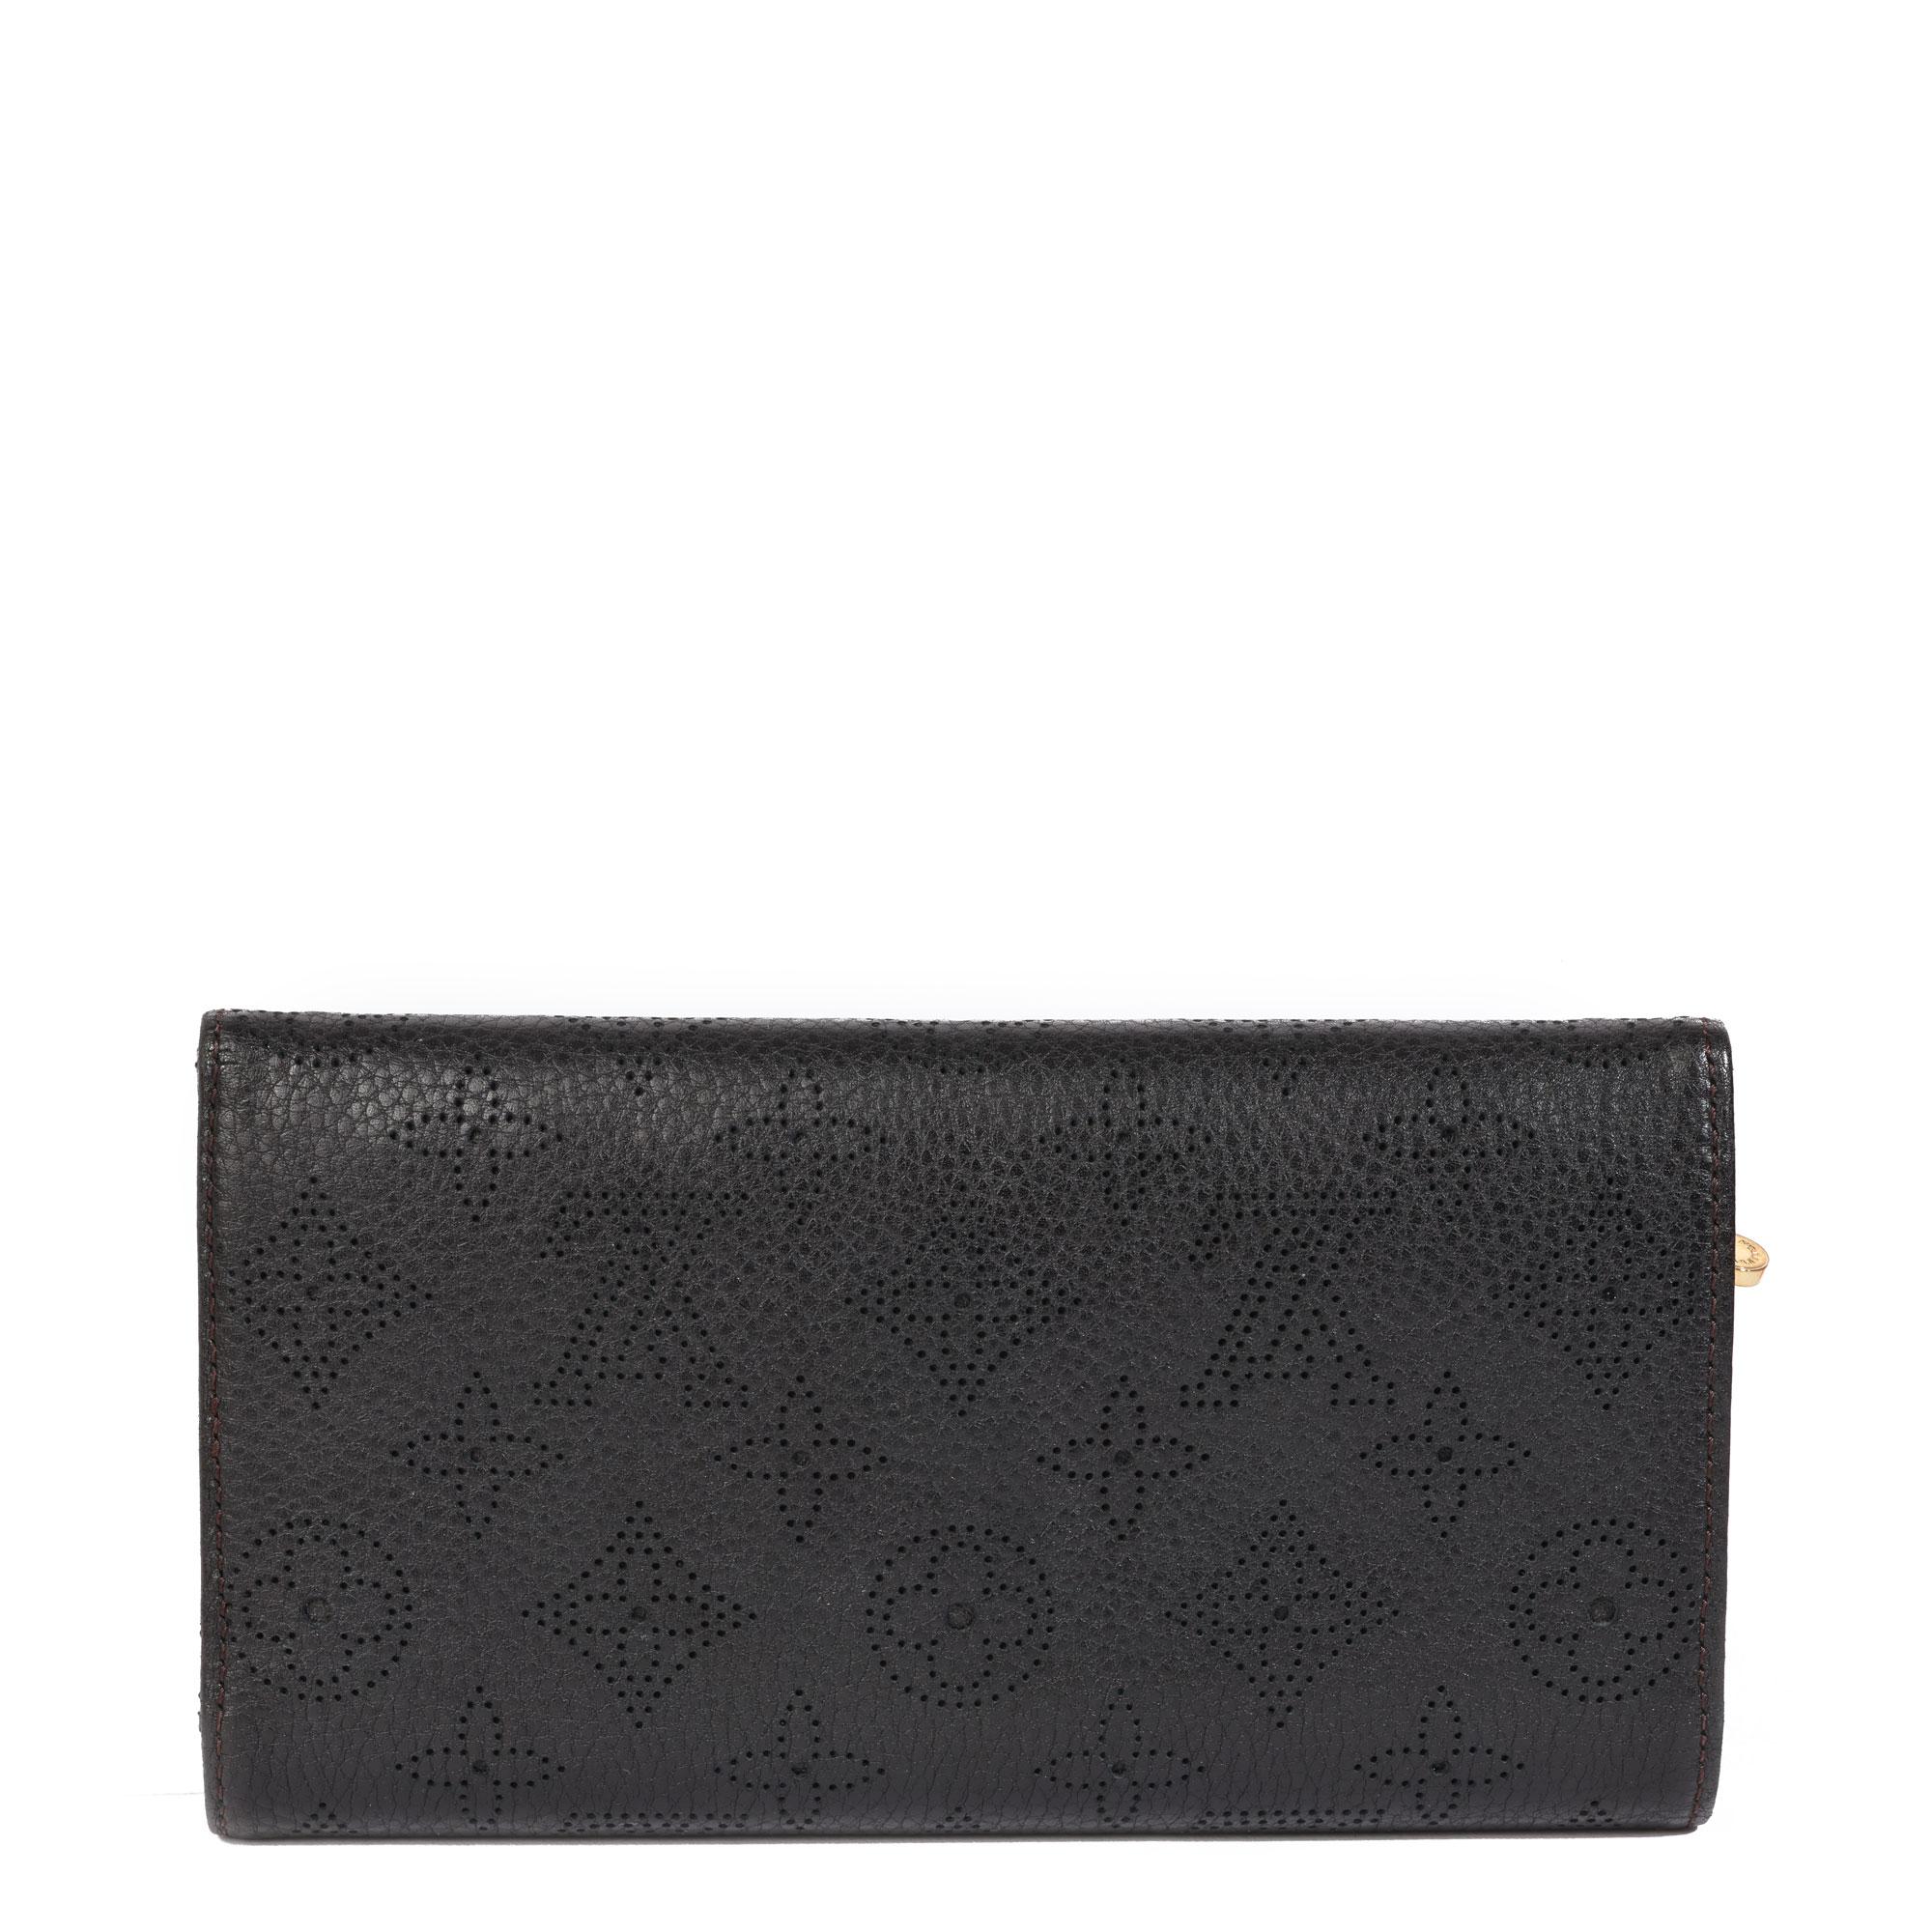 Louis Vuitton BLACK PERFORATED MAHINA CALFSKIN LEATHER AMELIA WALLET

CONDITION NOTES
The exterior is in good condition with minimal signs of use.
The interior is in good condition with minimal signs of use.
The hardware is in good condition with